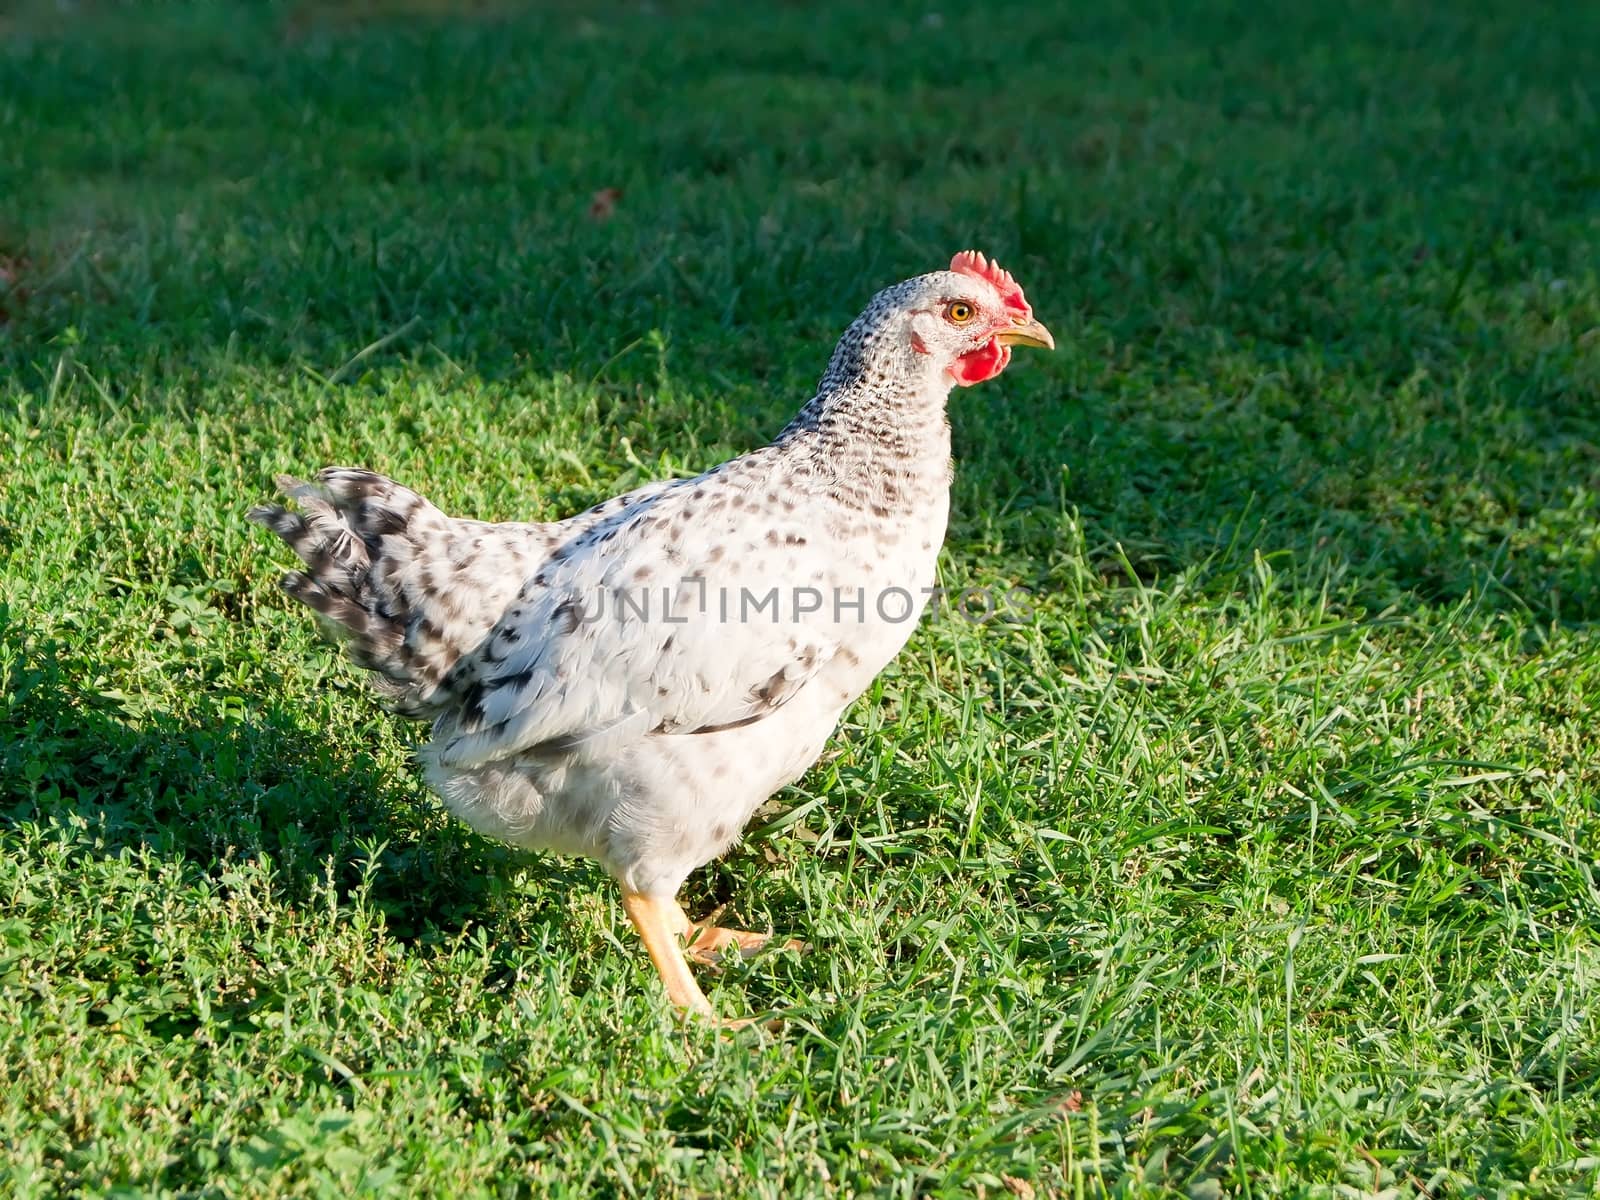 The young hen in the yard.